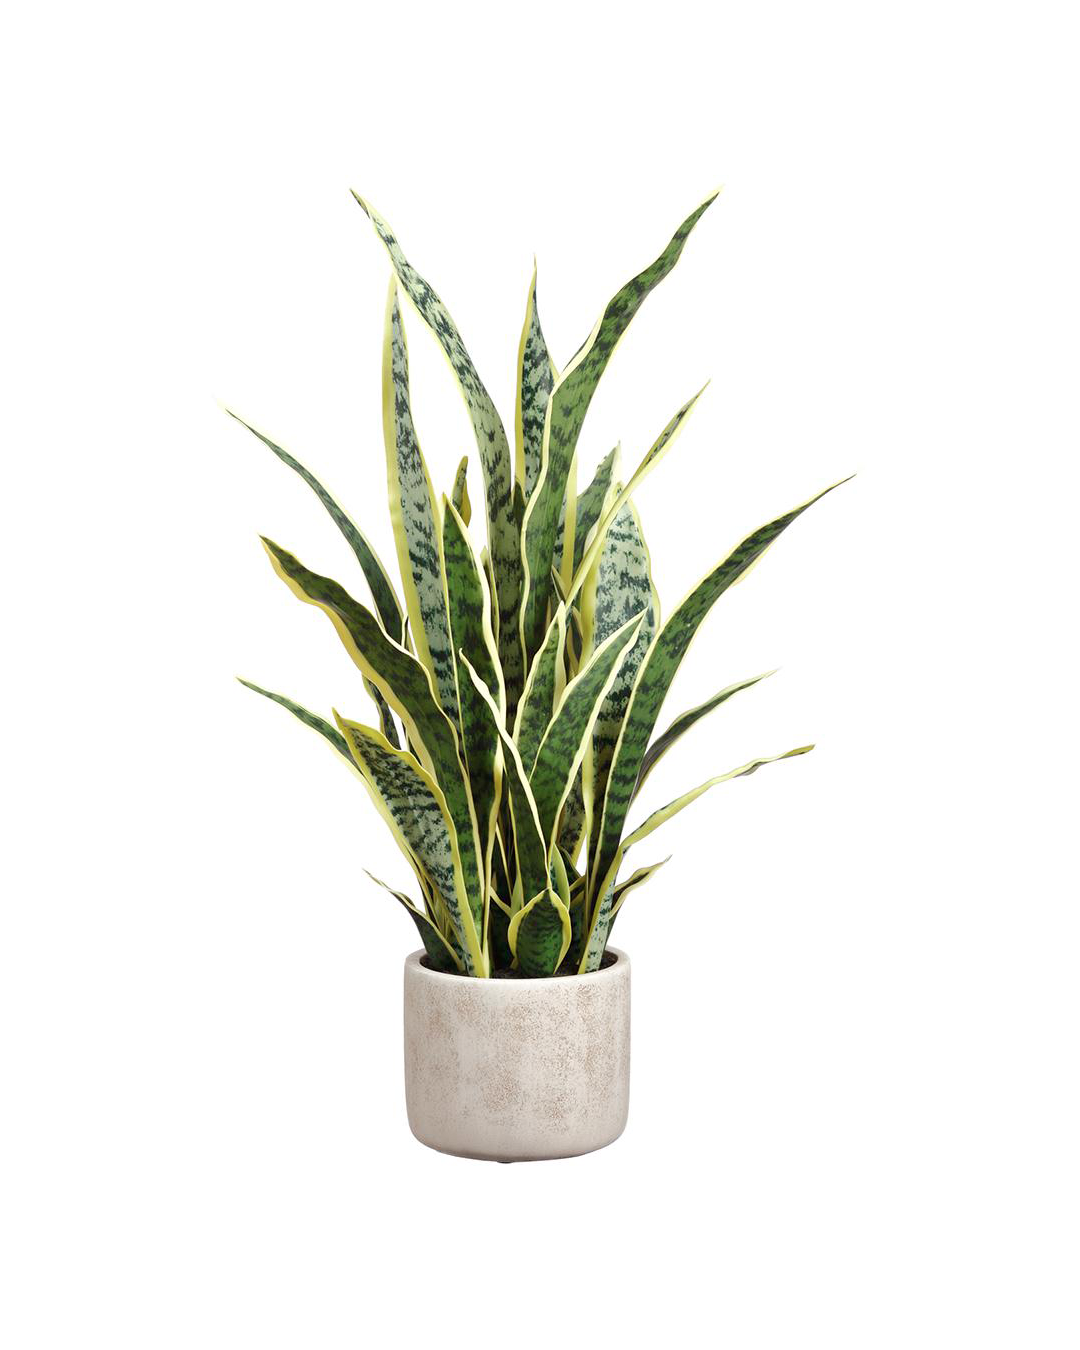 A 28" Variegated Sansevieria Plant (Sansevieria trifasciata) with tall, upright leaves marked with green and yellow in a light gray concrete pot, perfect for a Scottsdale Arizona bungalow, isolated on a white background by AllState Floral And Craft.